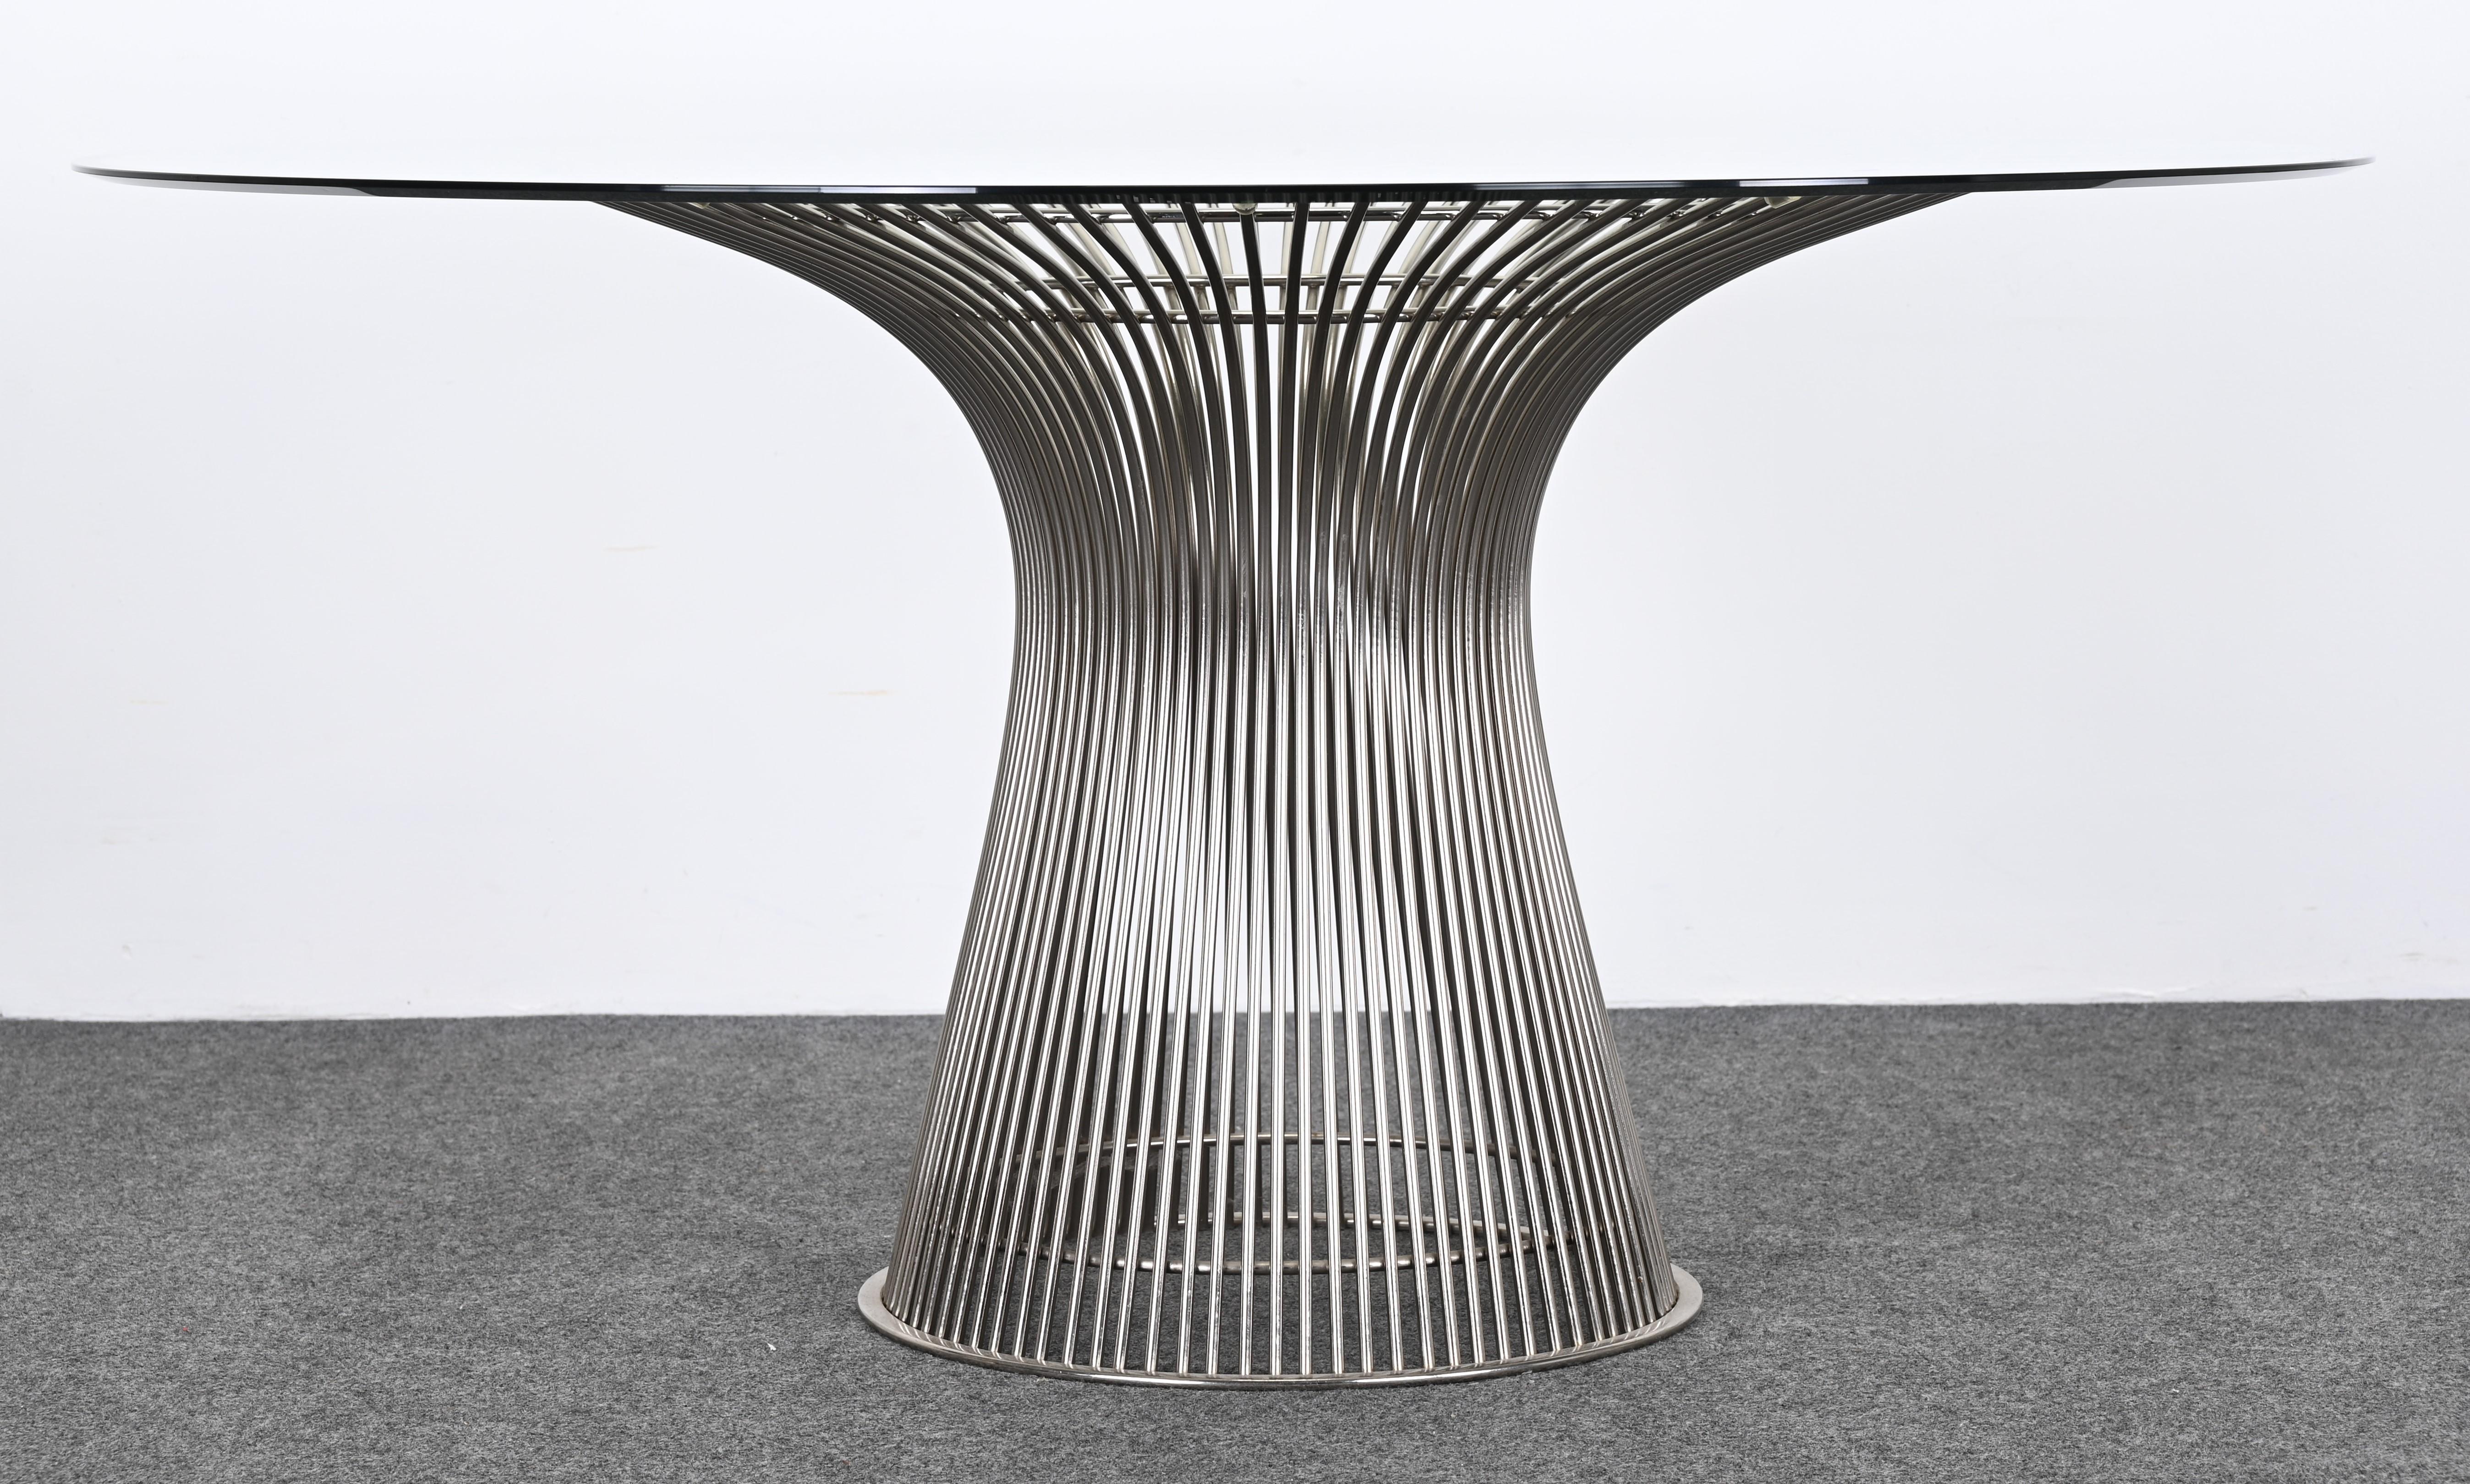 An exquisite table designed by Warren Platner for Knoll. This iconic dining table would look great in any Contemporary, Transitional, or Traditional interior. This set has a timeless design that will never go out of style. This table is made in